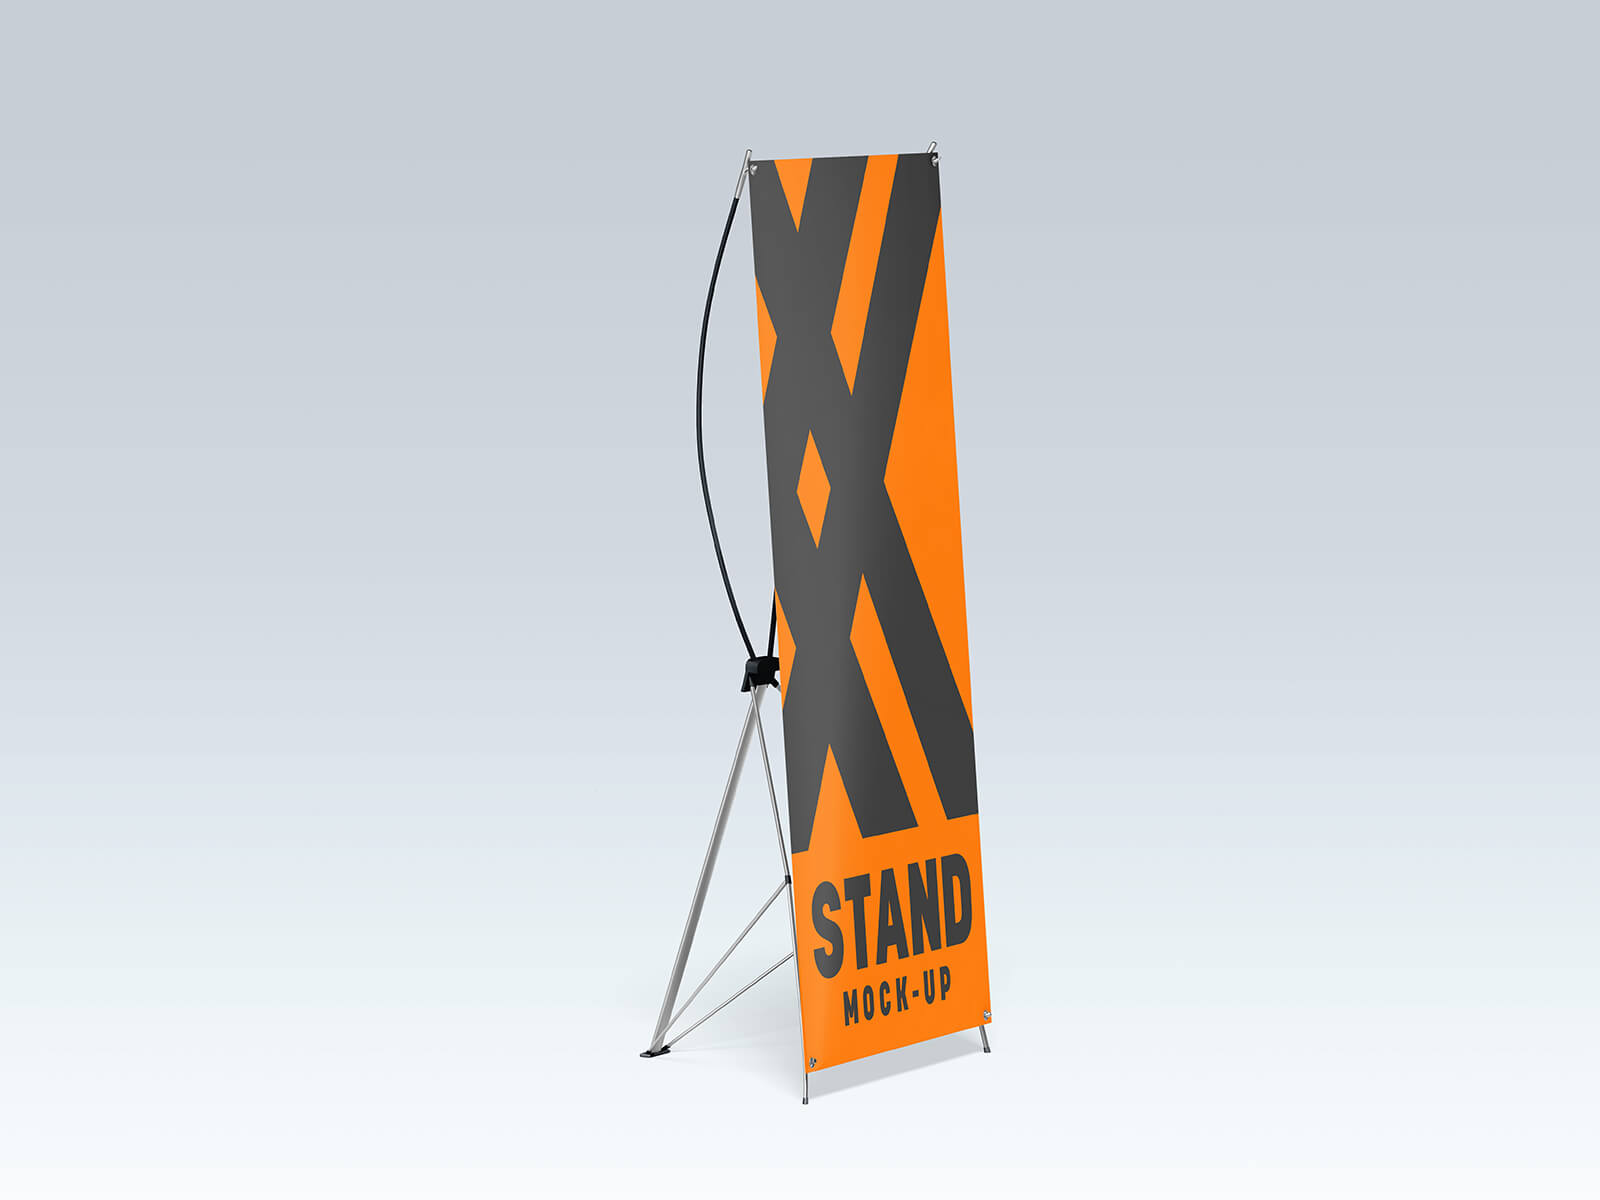 Free Standee X-Stand Banner Mockup PSD